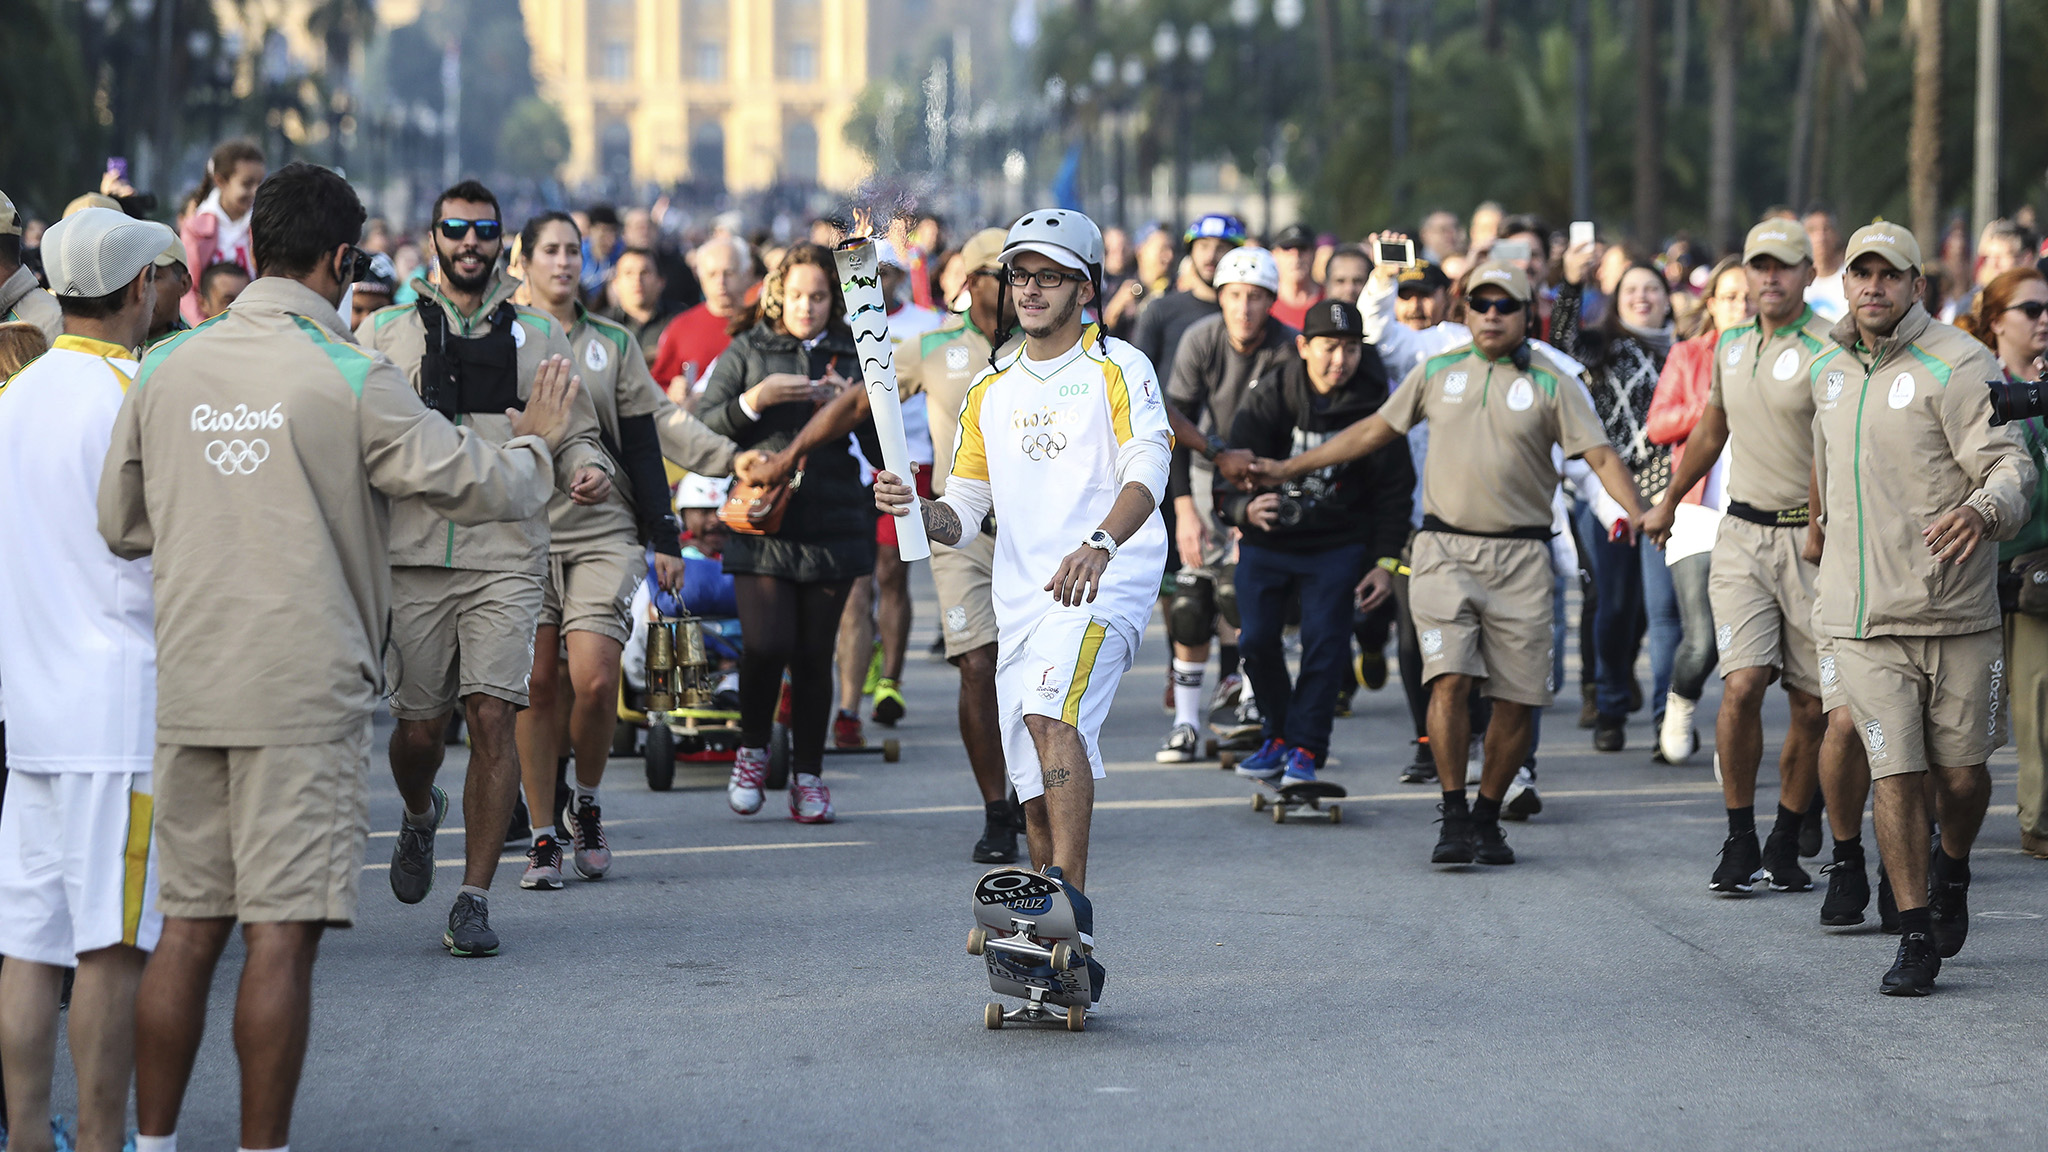 Skateboarding gets the Olympic nod